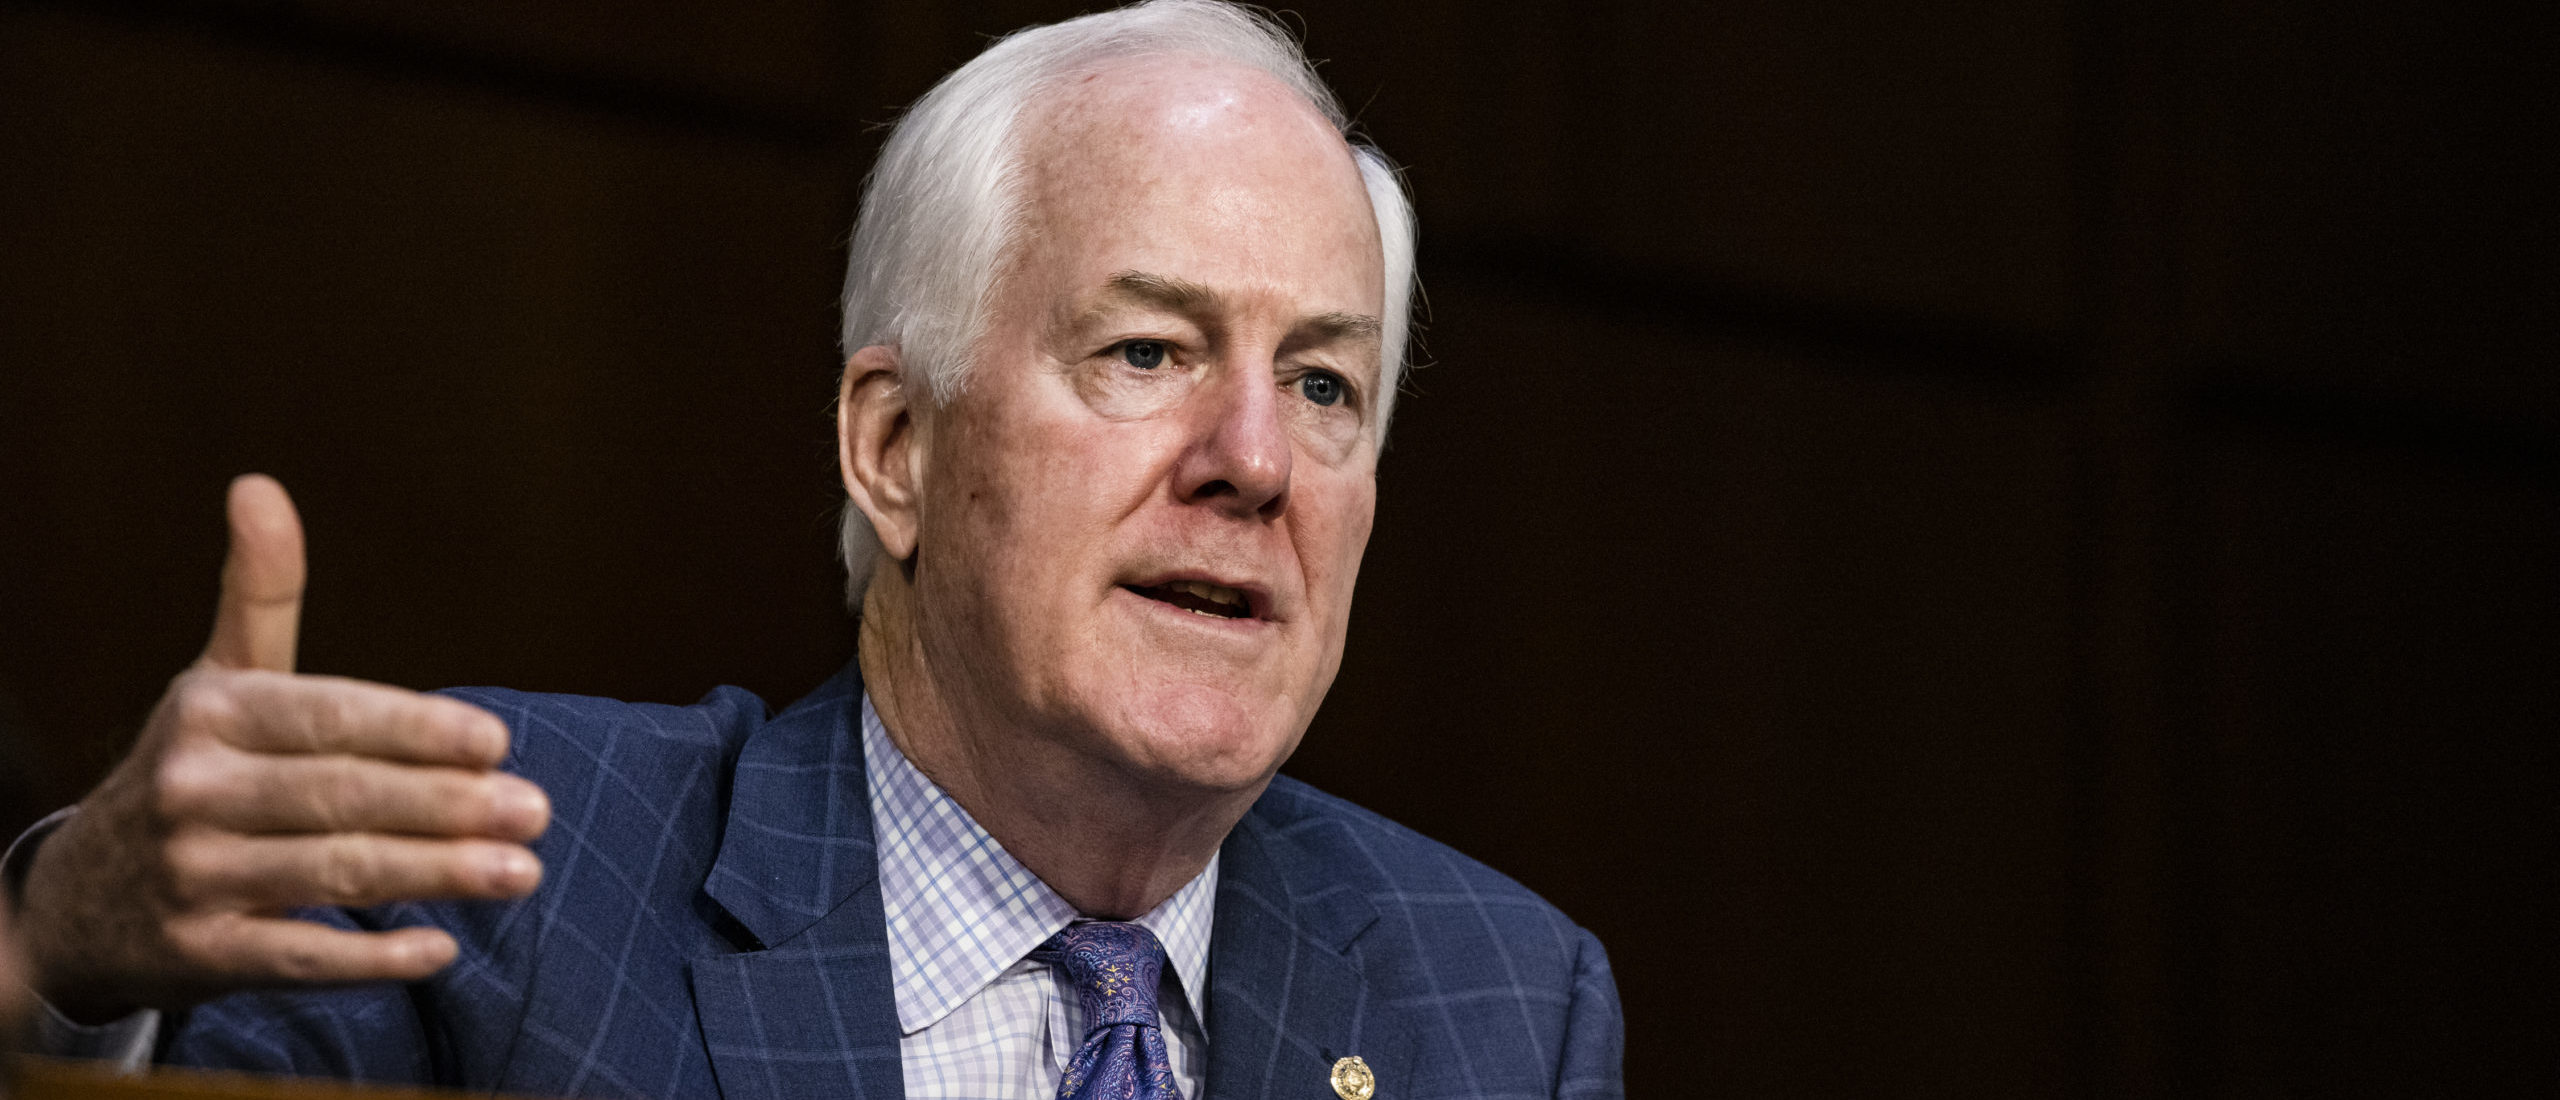 WASHINGTON, DC - OCTOBER 15: Senator John Cornyn (R-TX) makes a statement before the Senate Judiciary Committee on the fourth day of Supreme Court nominee Judge Amy Coney Barrett's confirmation hearing on Capitol Hill on October 15, 2020 in Washington, DC. Barrett was nominated by President Donald Trump to fill the vacancy left by Justice Ruth Bader Ginsburg who passed away in September. (Photo by Samuel Corum/Getty Images)